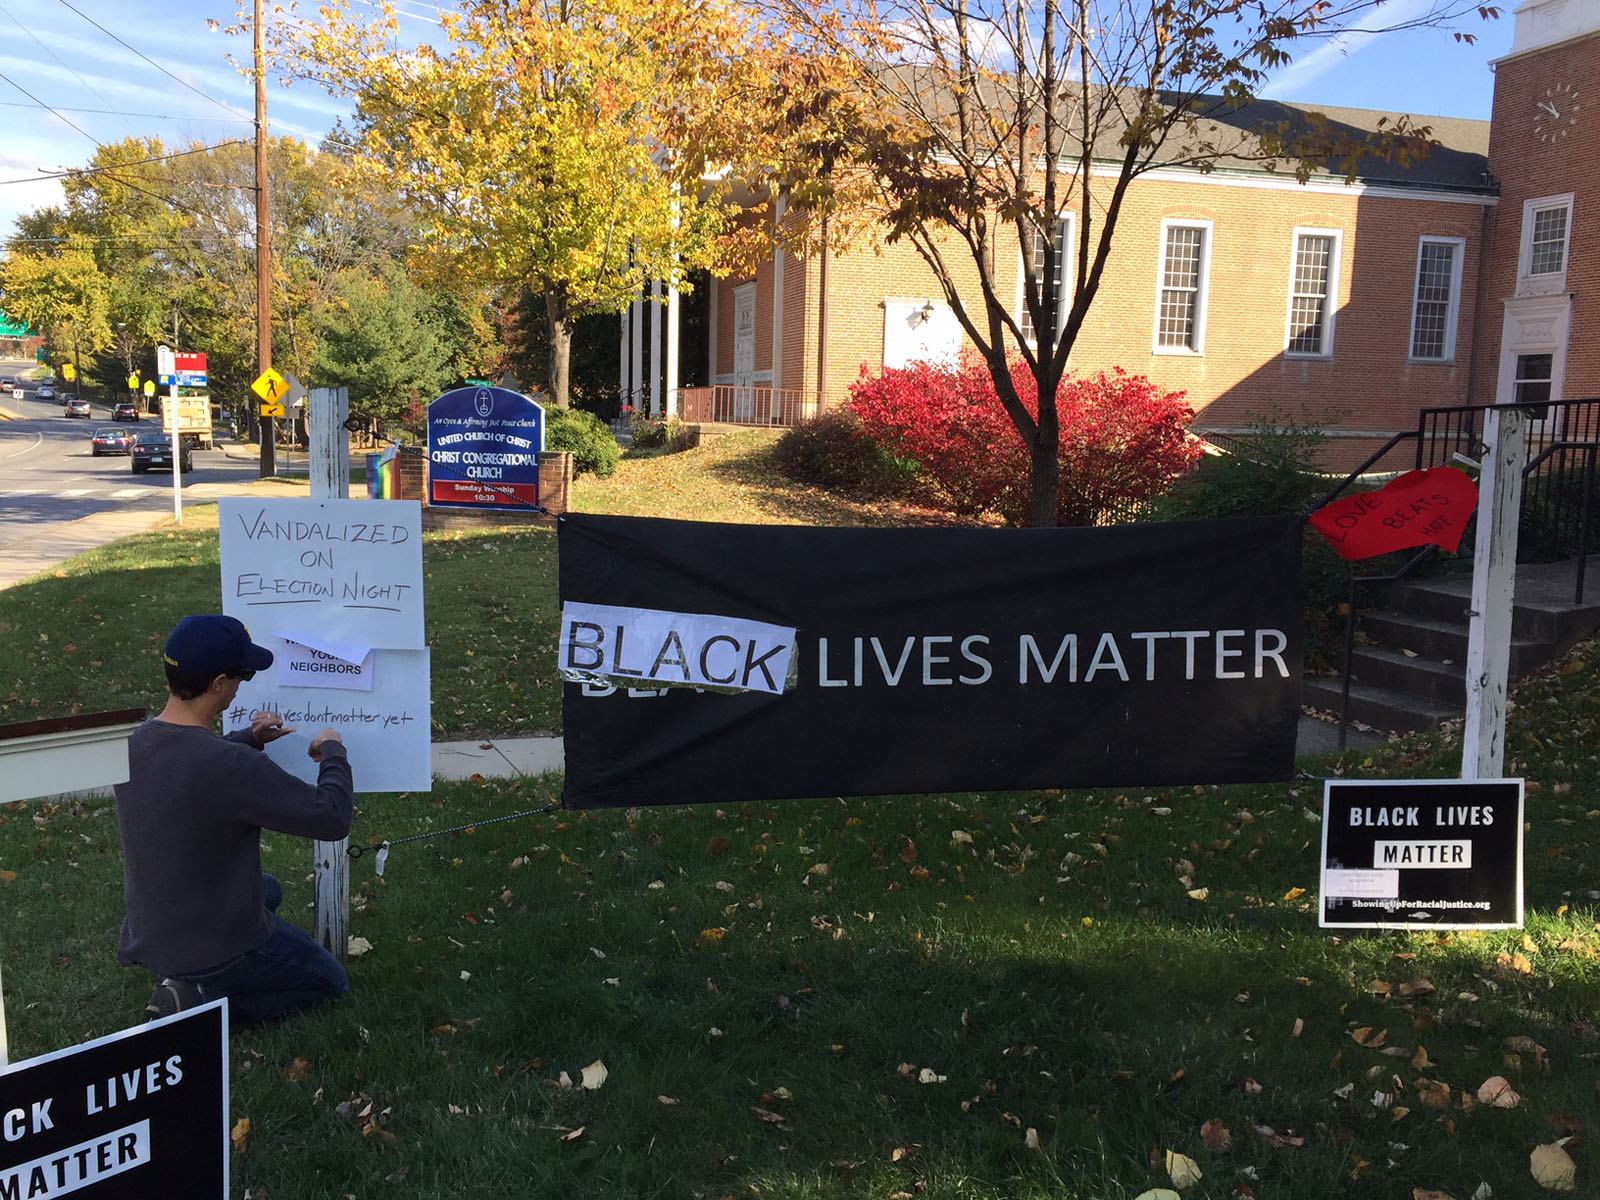 The "Black Lives Matter" sign was vandalized outside Christ Congregational Church in Silver Spring, Maryland. Residents repaired the sign and added messages. (WTOP/John Aaron)